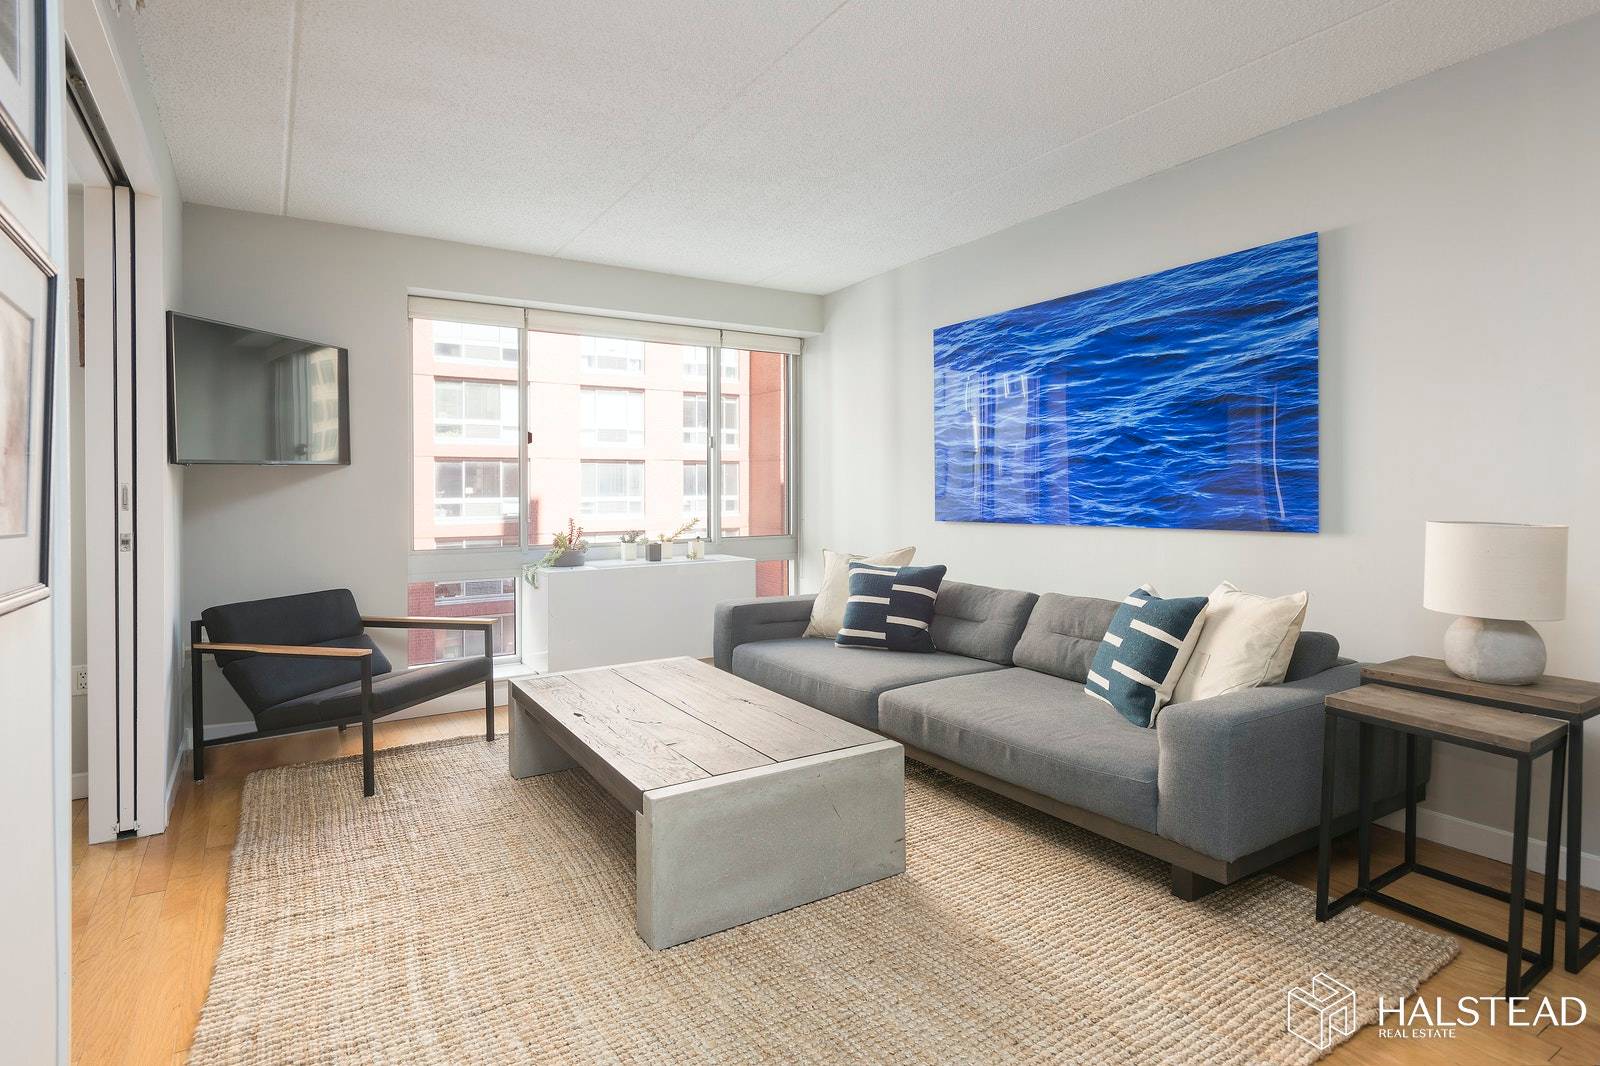 555 West 23rd Street is Chelsea's well known and much loved full service lifestyle address.